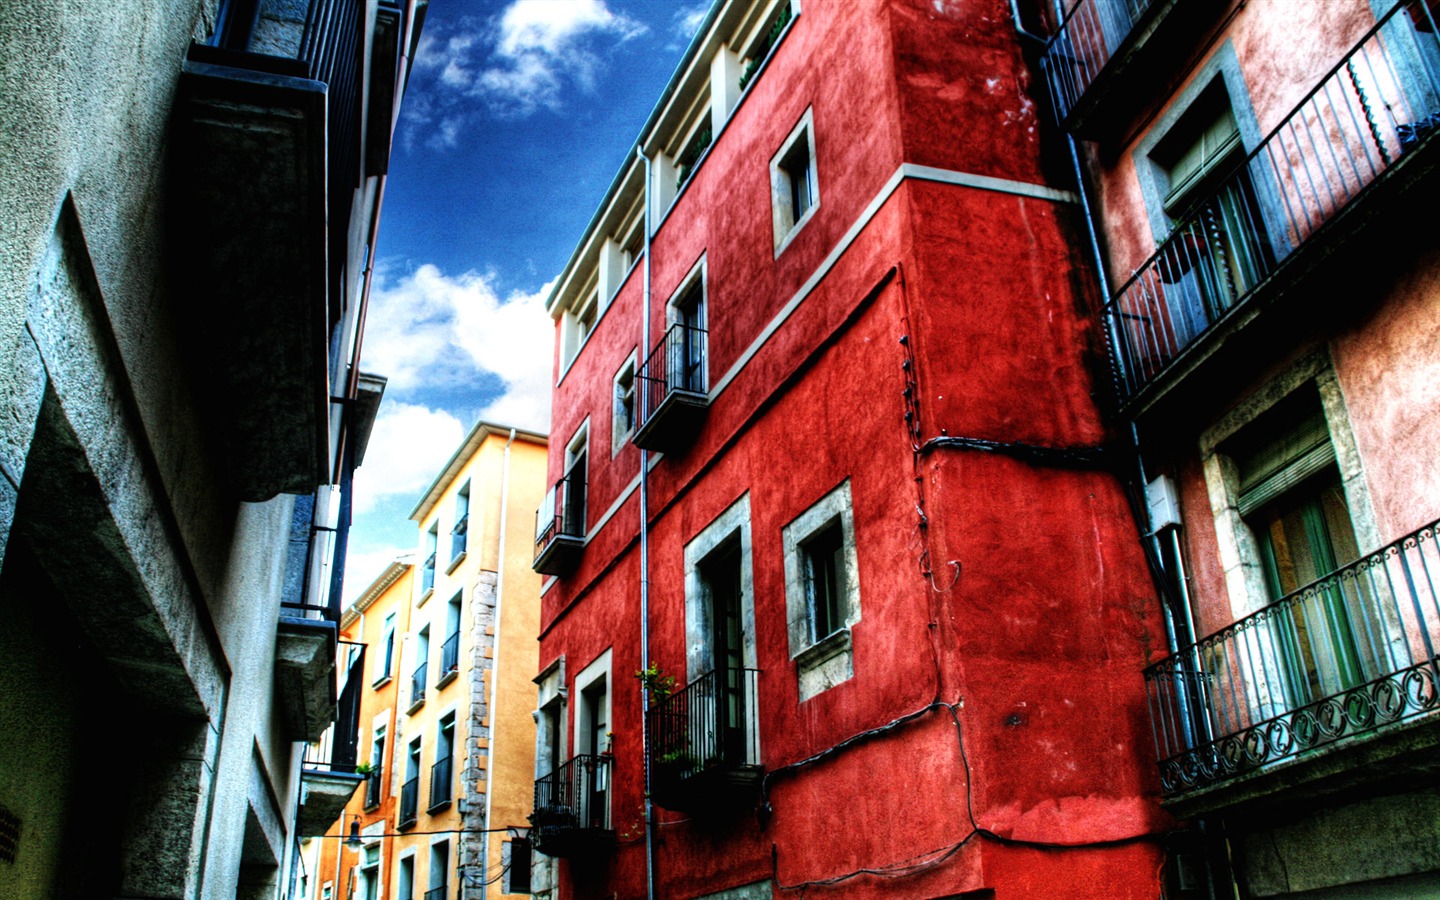 Spain Girona HDR-style wallpapers #4 - 1440x900